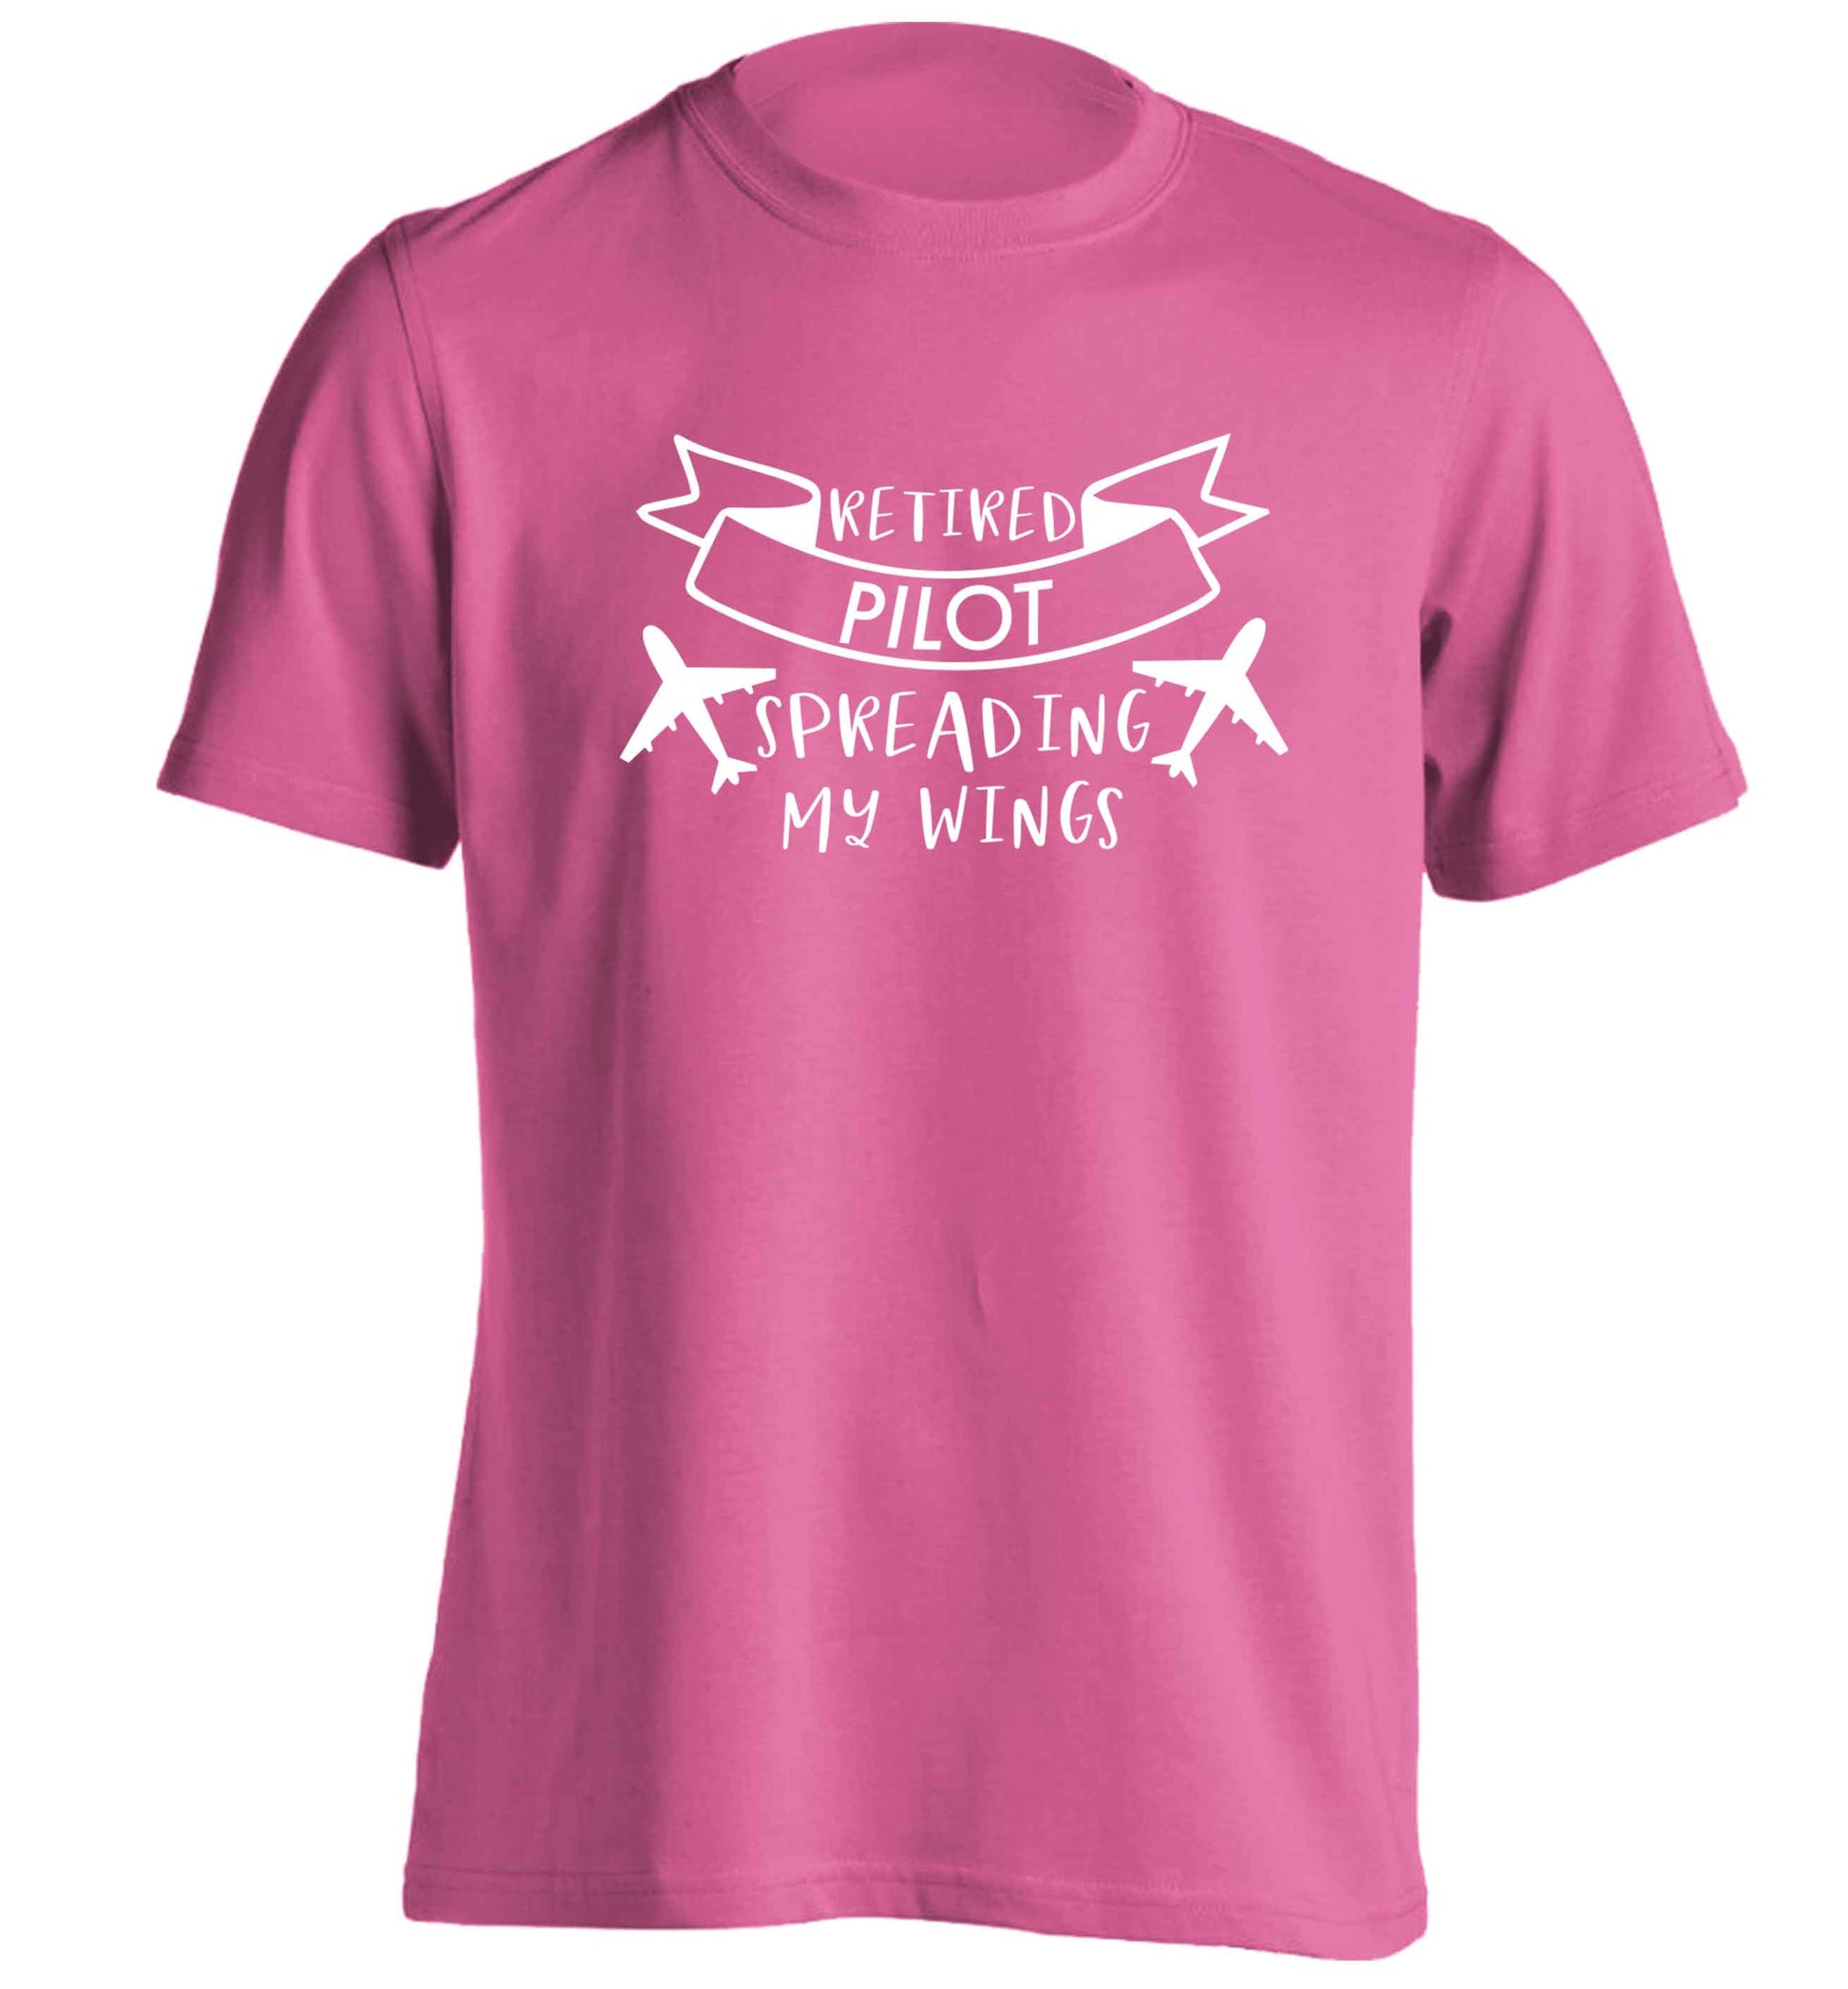 Retired pilot spreading my wings adults unisex pink Tshirt 2XL